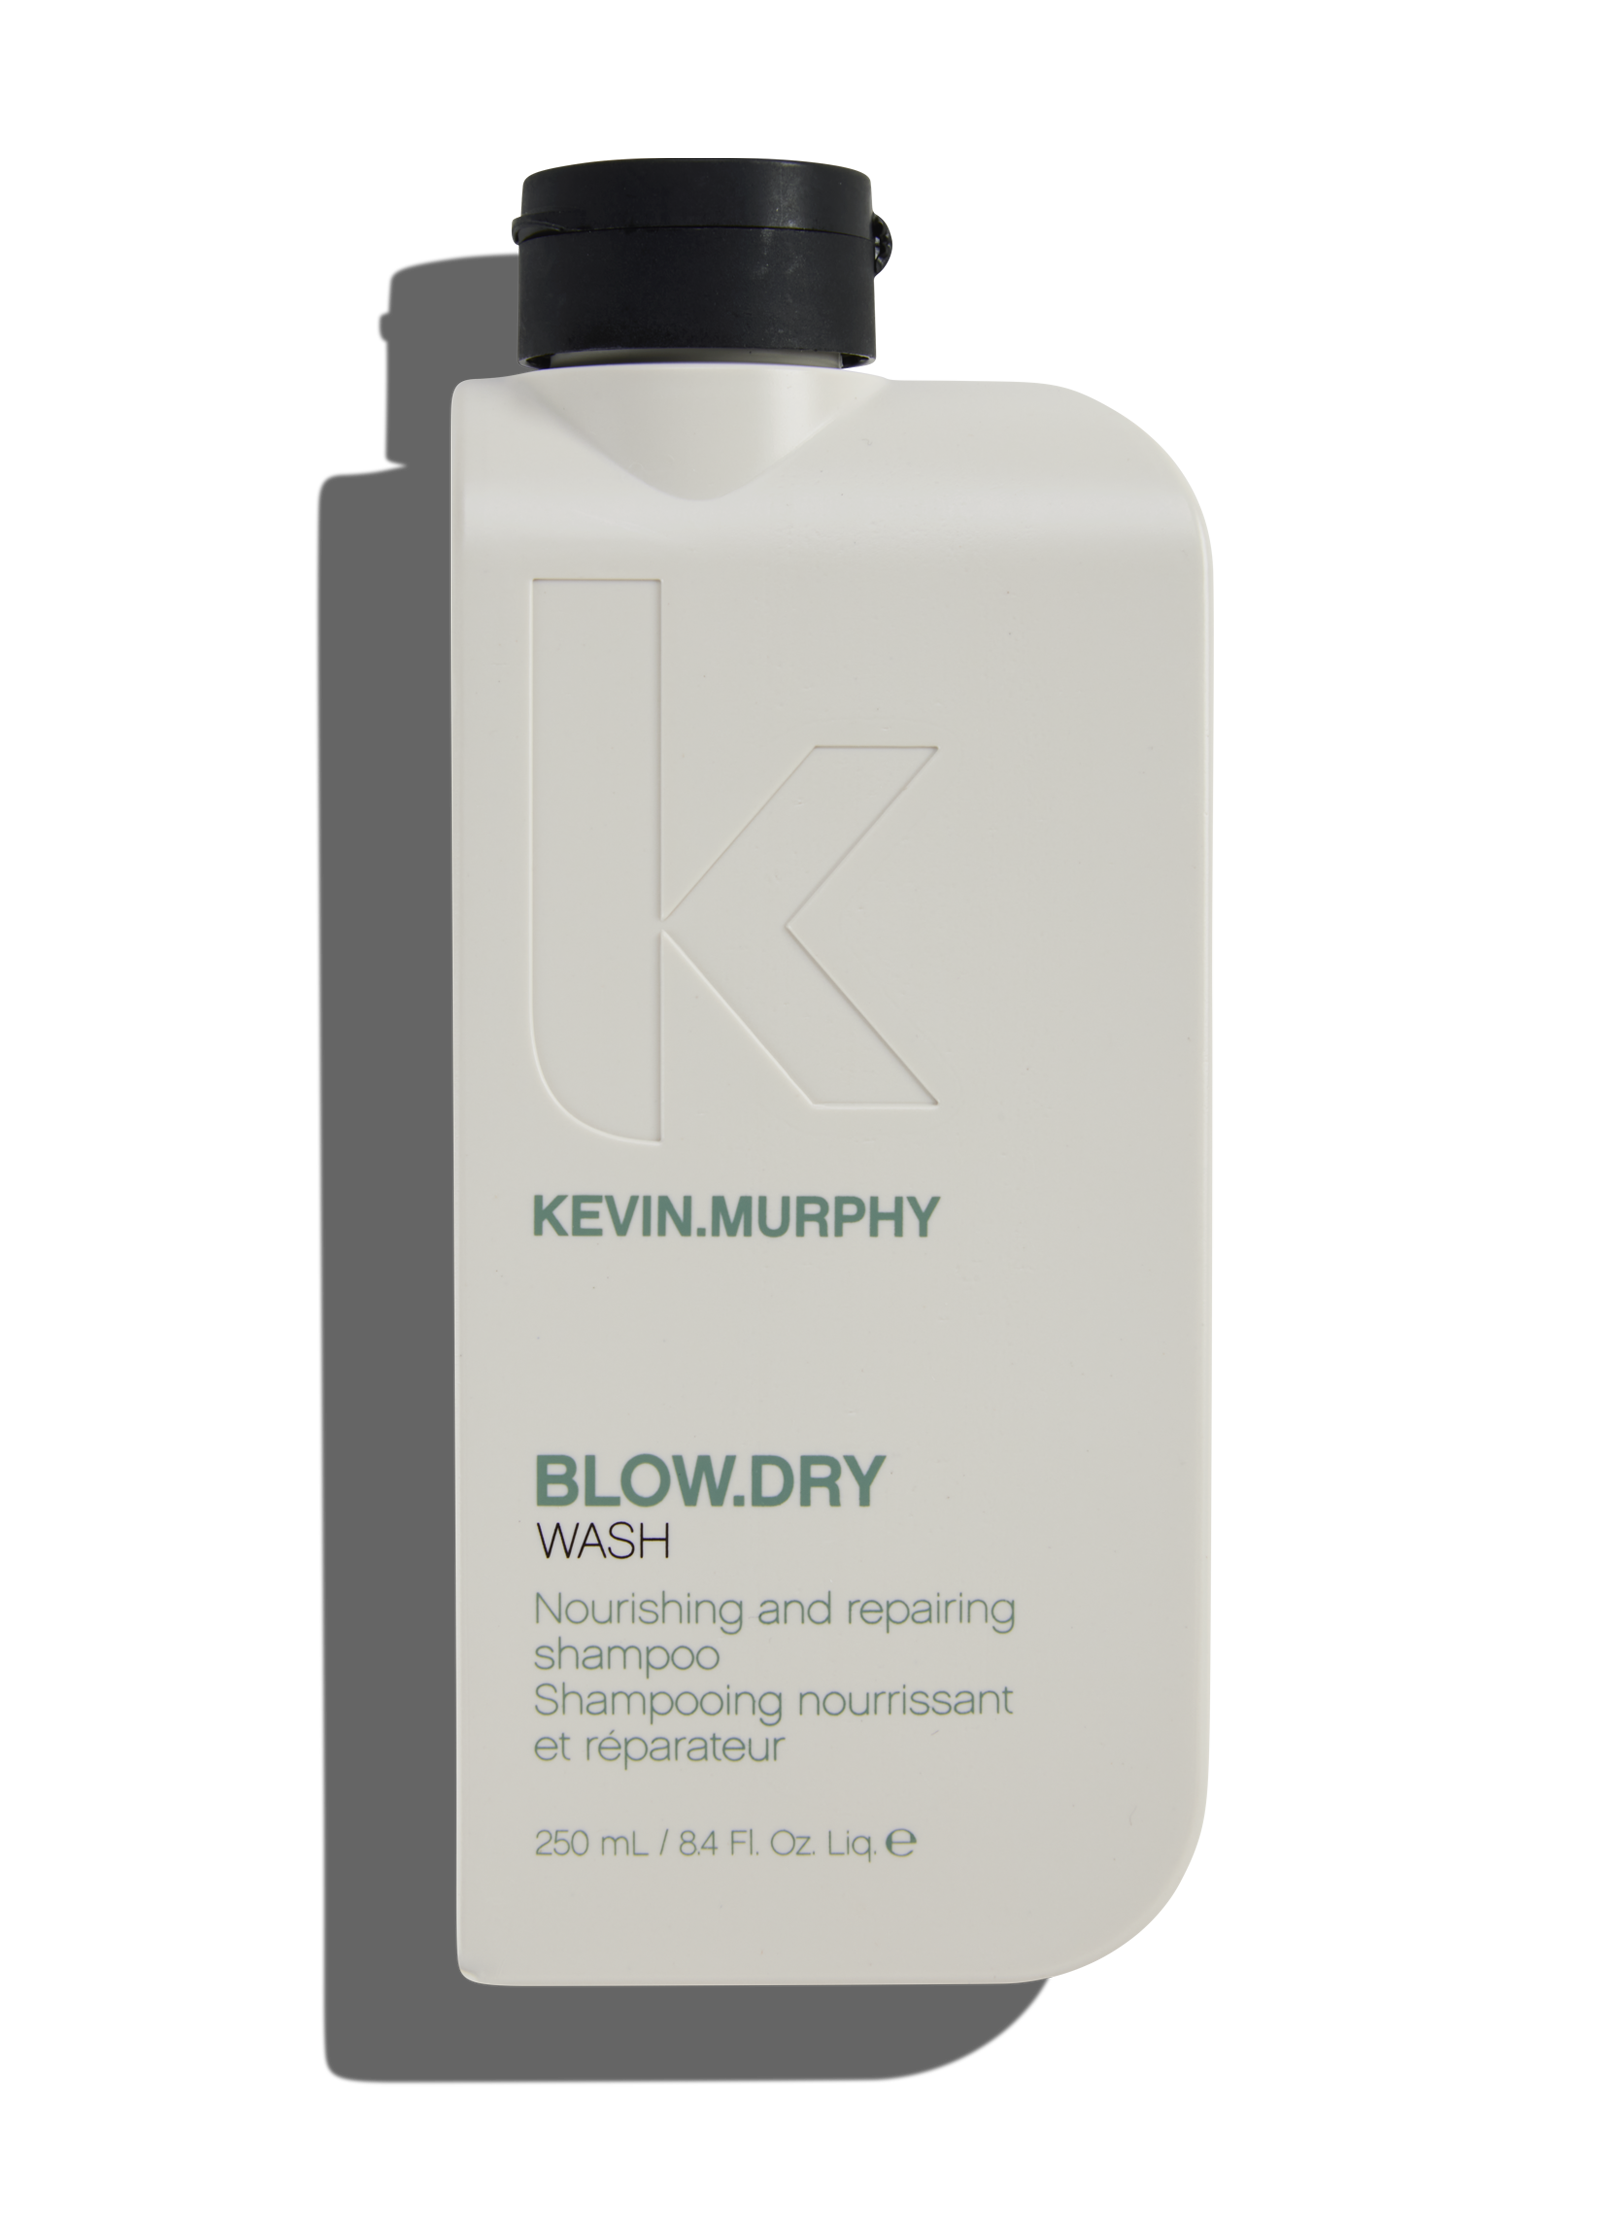 Kevin Murphy introduces scalp care products